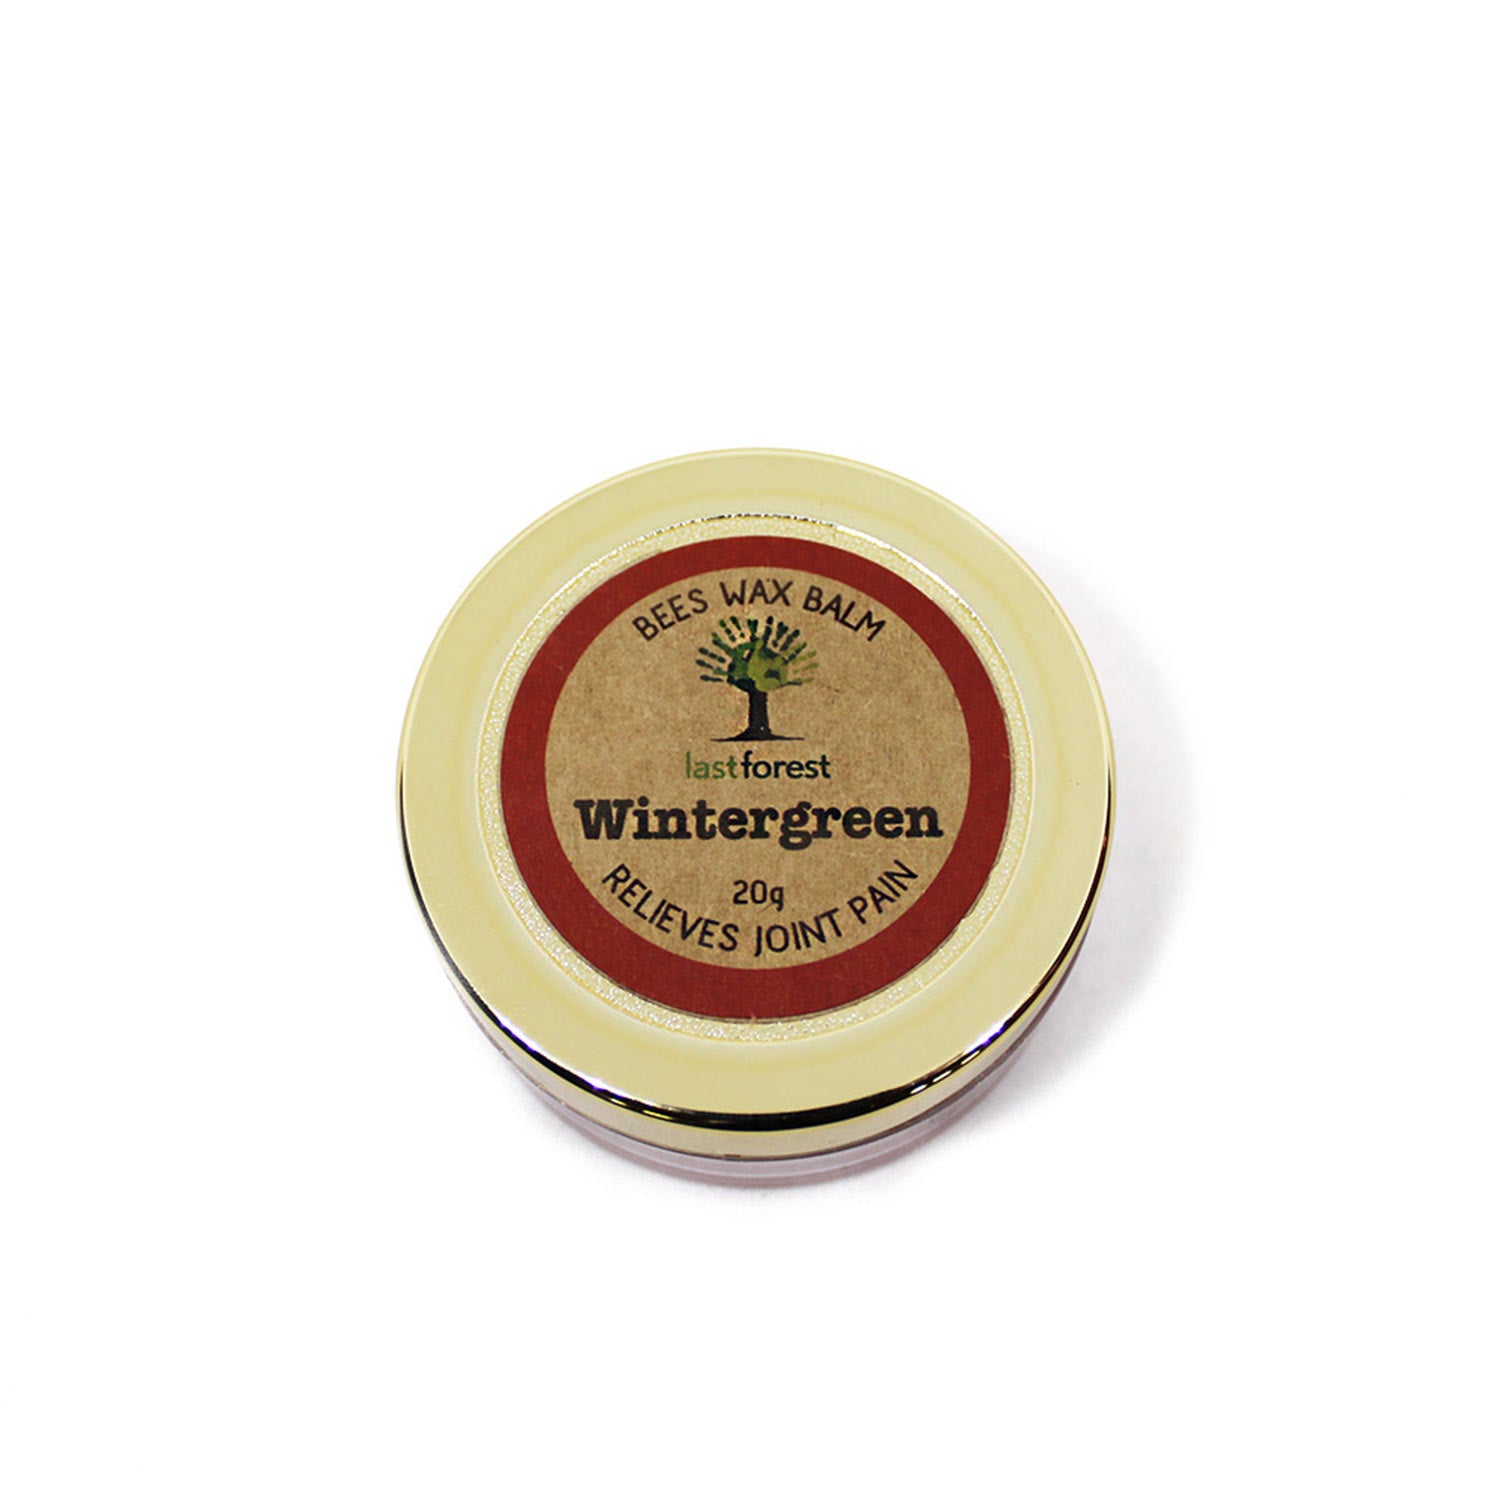 Last Forest Wintergreen Balm for massage, soothes sore muscles and inflamed joints, 20g